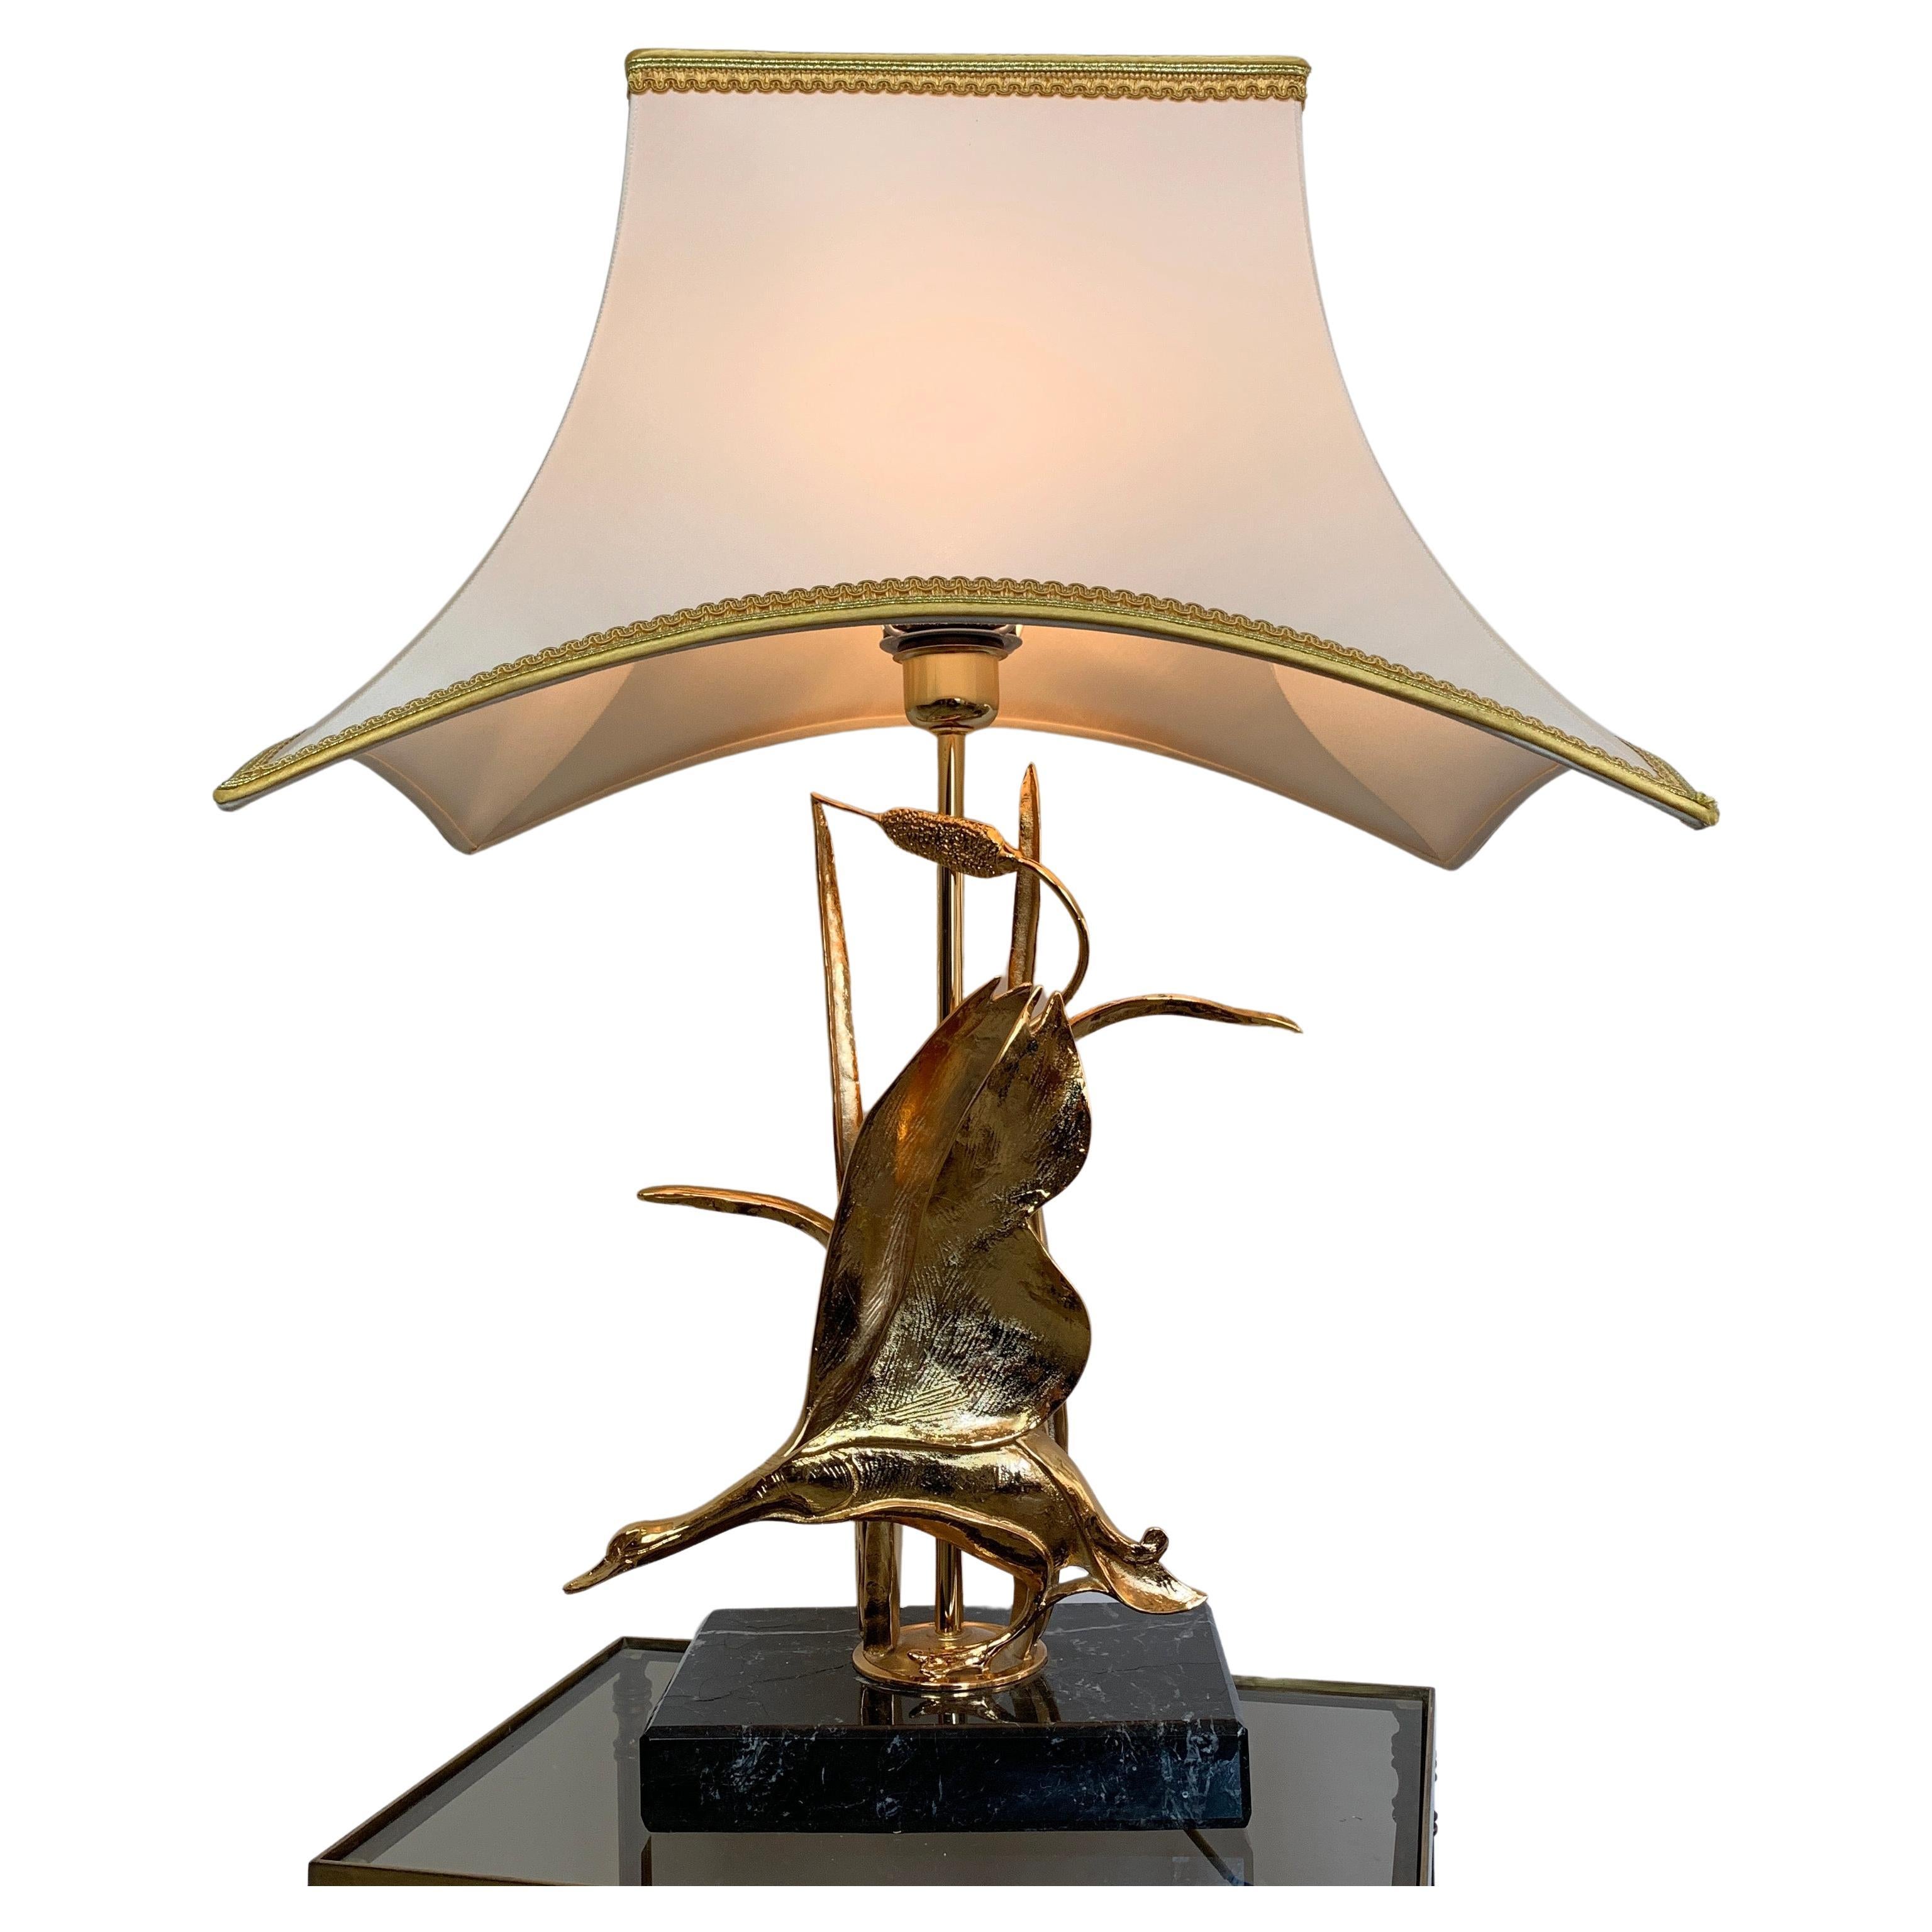 Lanciotto Galeotti Table Lamp, Italy 1970s For L'originale
Midcentury gold plated table lamp depicting a flying goose and bulrushes
The brass based bird sculpture is mounted on a marble/travertine stone base, typical of Italian lamps of this era.